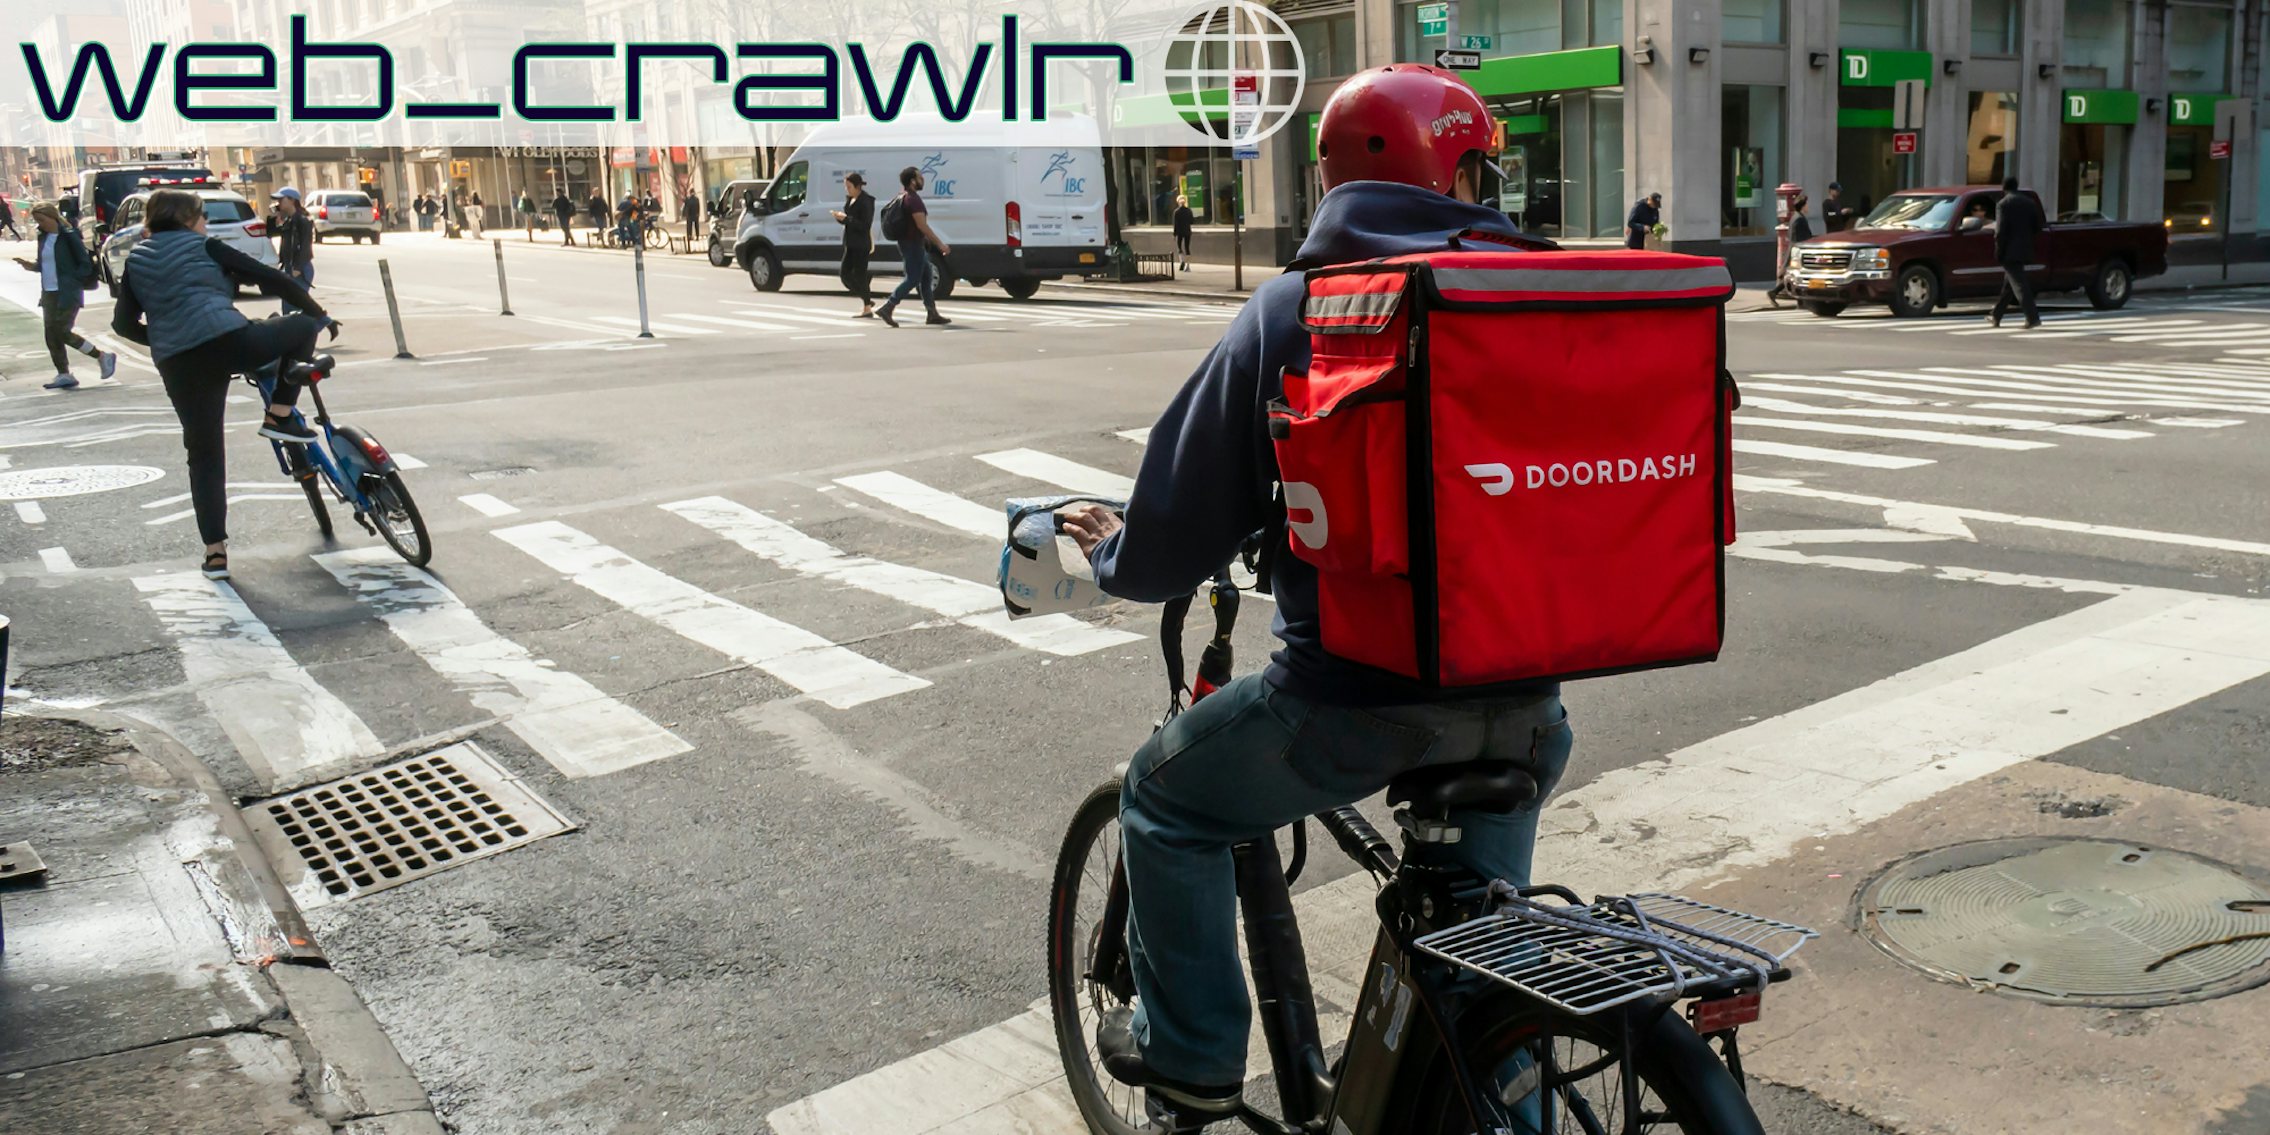 A person on a bike with a DoorDash bag. The Daily Dot newsletter web_crawlr logo is in the top left corner.